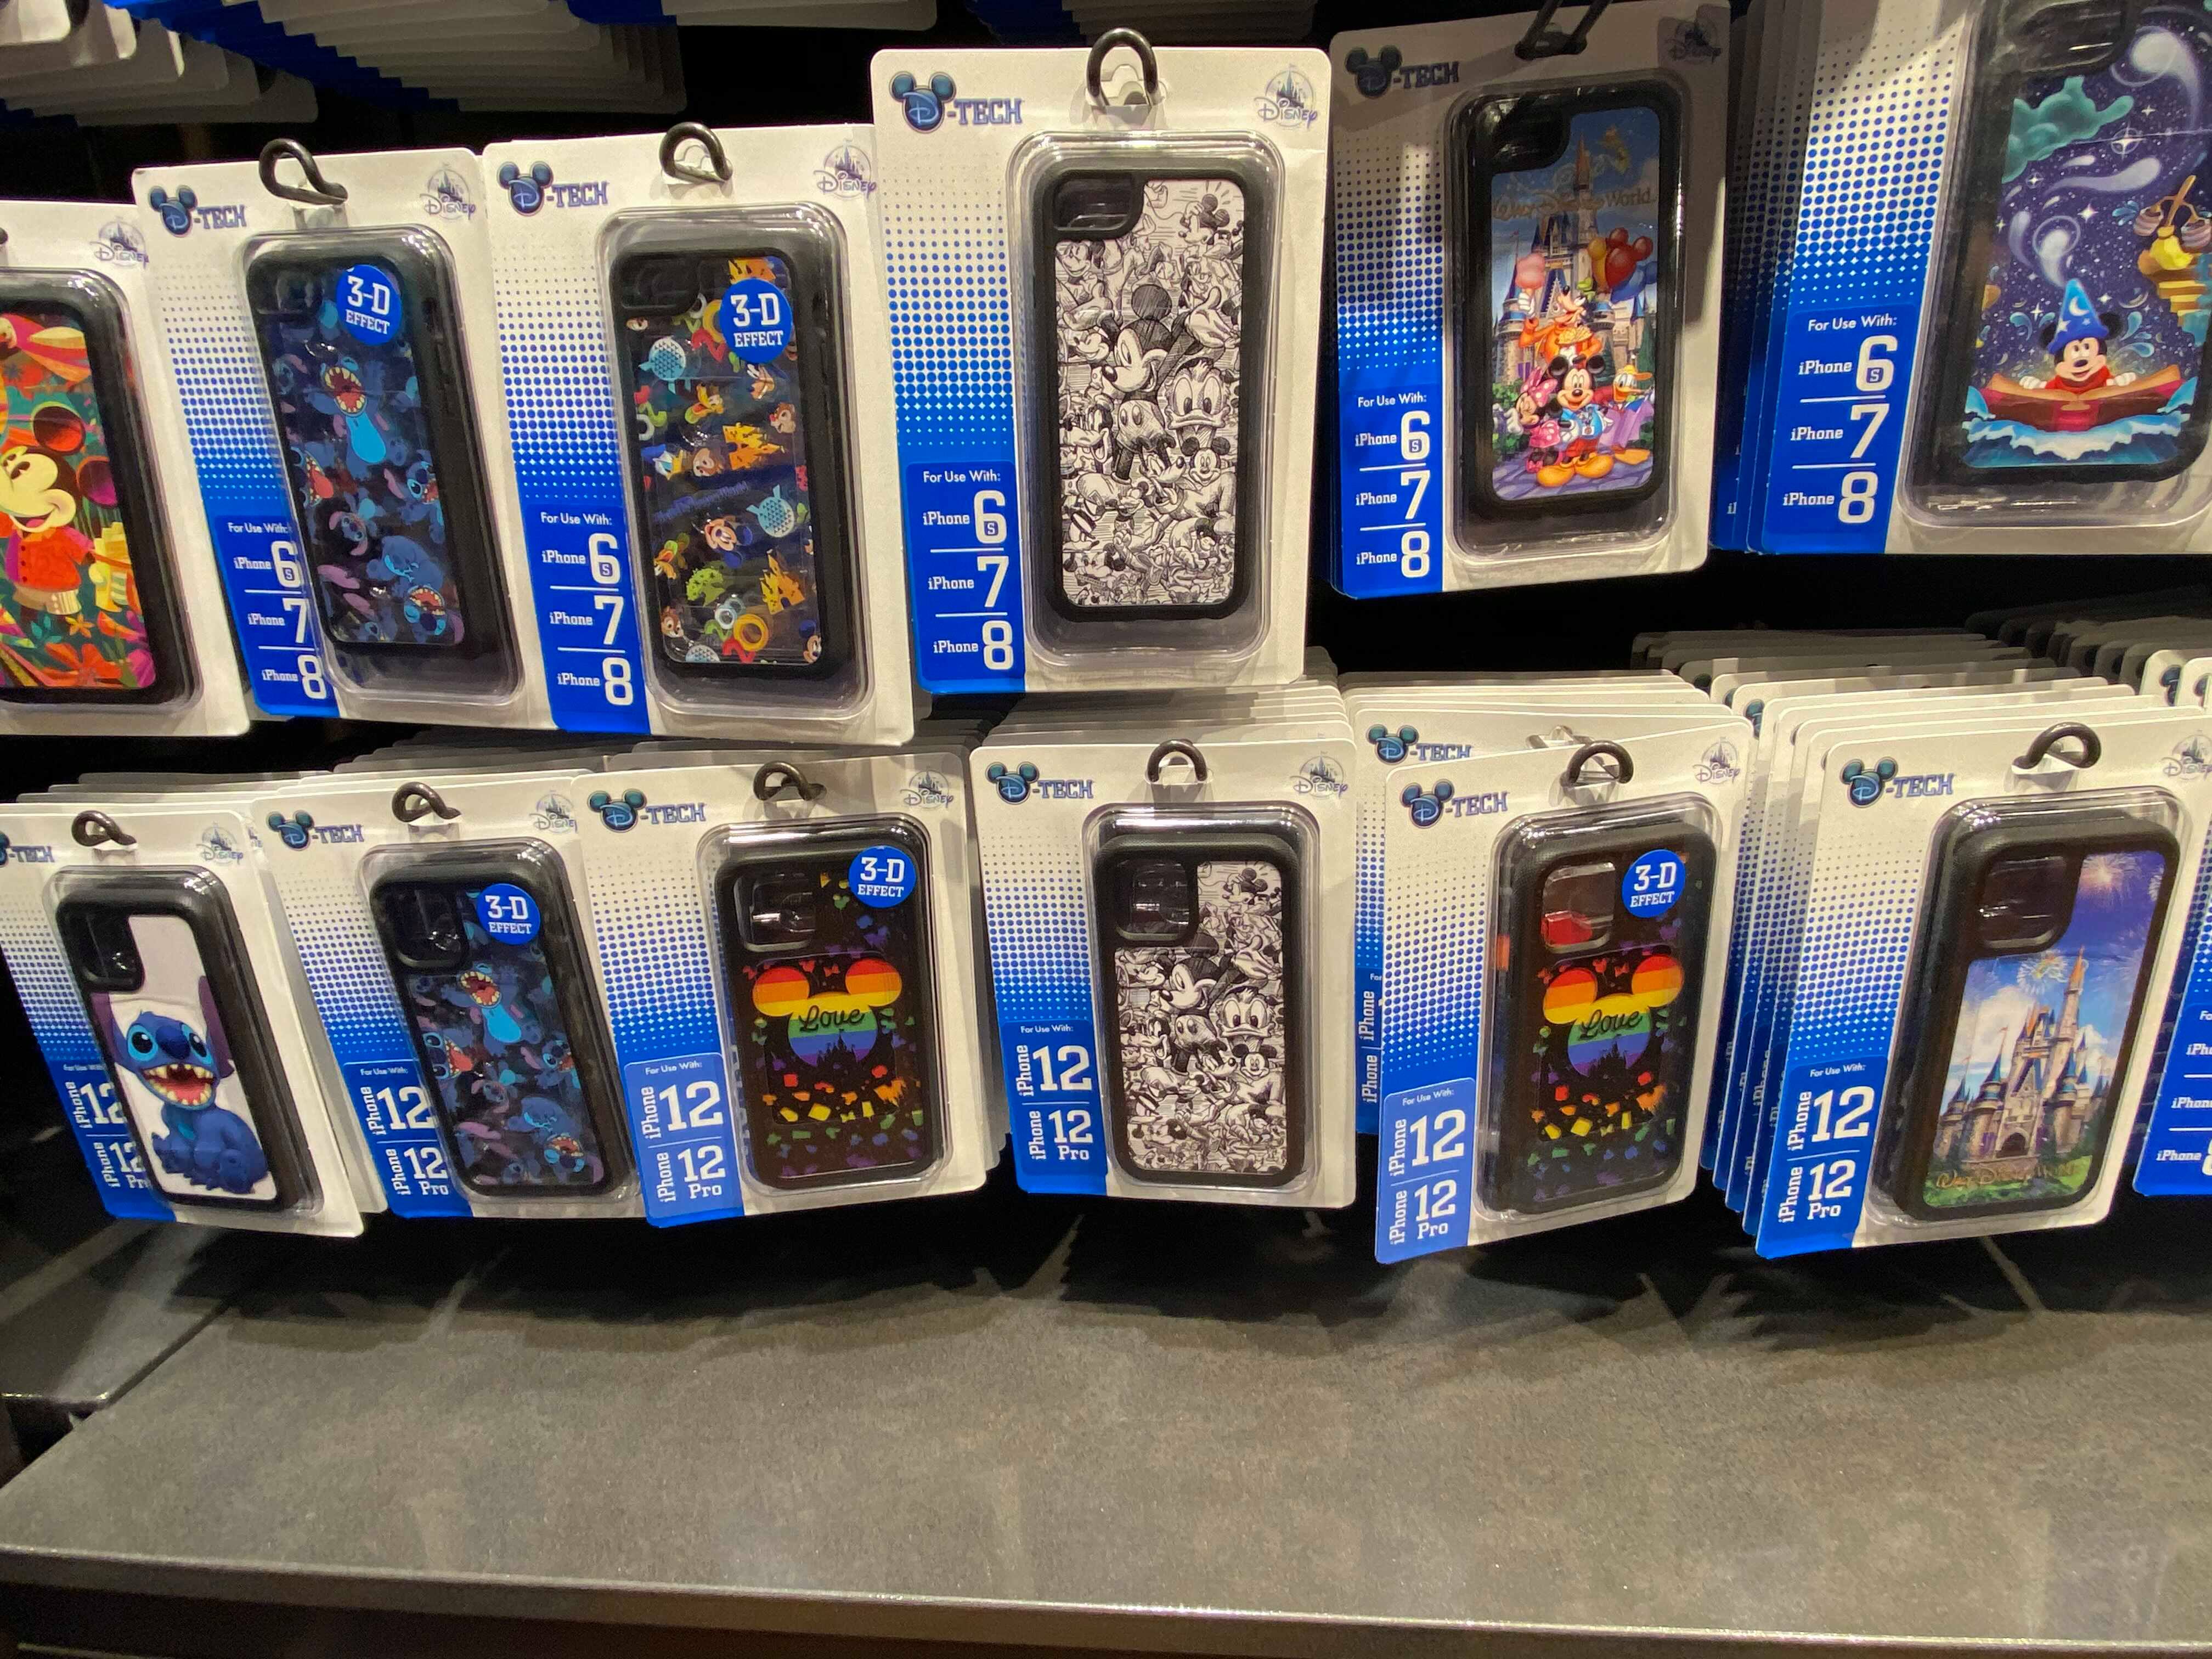 Disney Themed Iphone 12 Cases Now Available At Disney Springs Mickeyblog Com